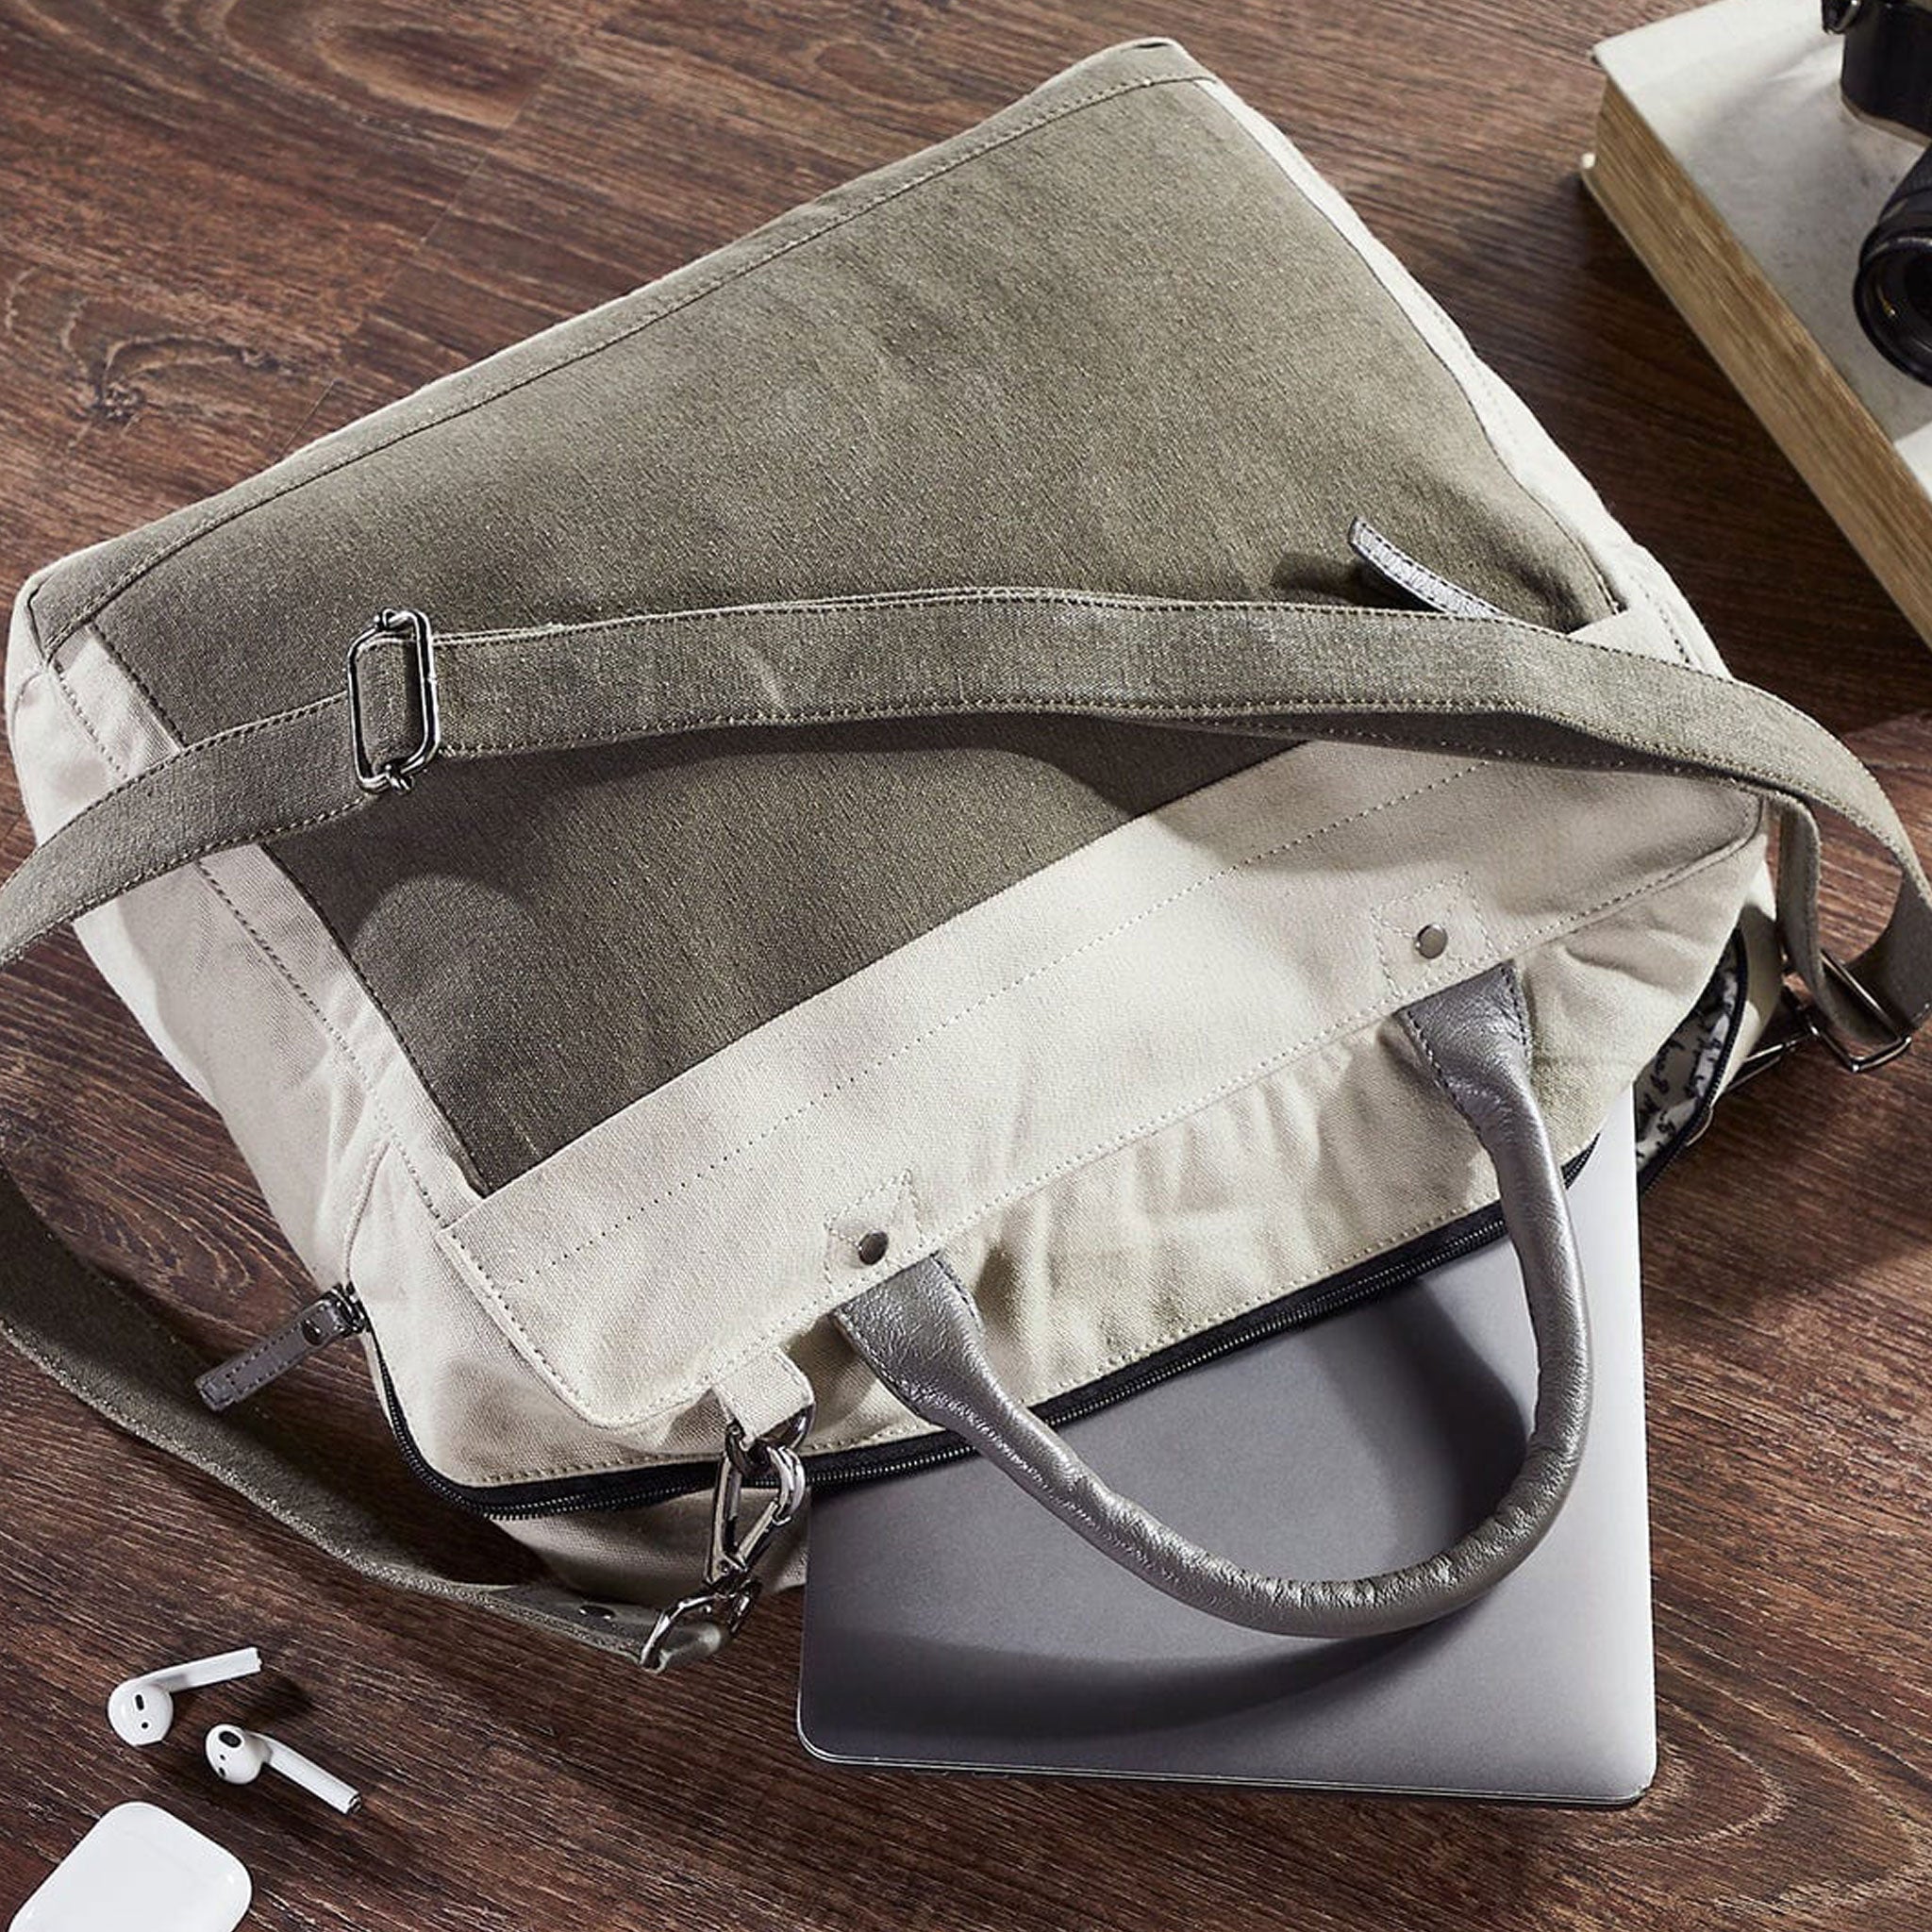 Mona B Ice Grey 100% Cotton Canvas Messenger Crossbody Laptop Bag for Upto 14" Laptop/Mac Book/Tablet with Stylish Design for Men and Women - Messenger by Mona-B - Backpack, Flash Sale, Sale, Shop2999, Shop3999